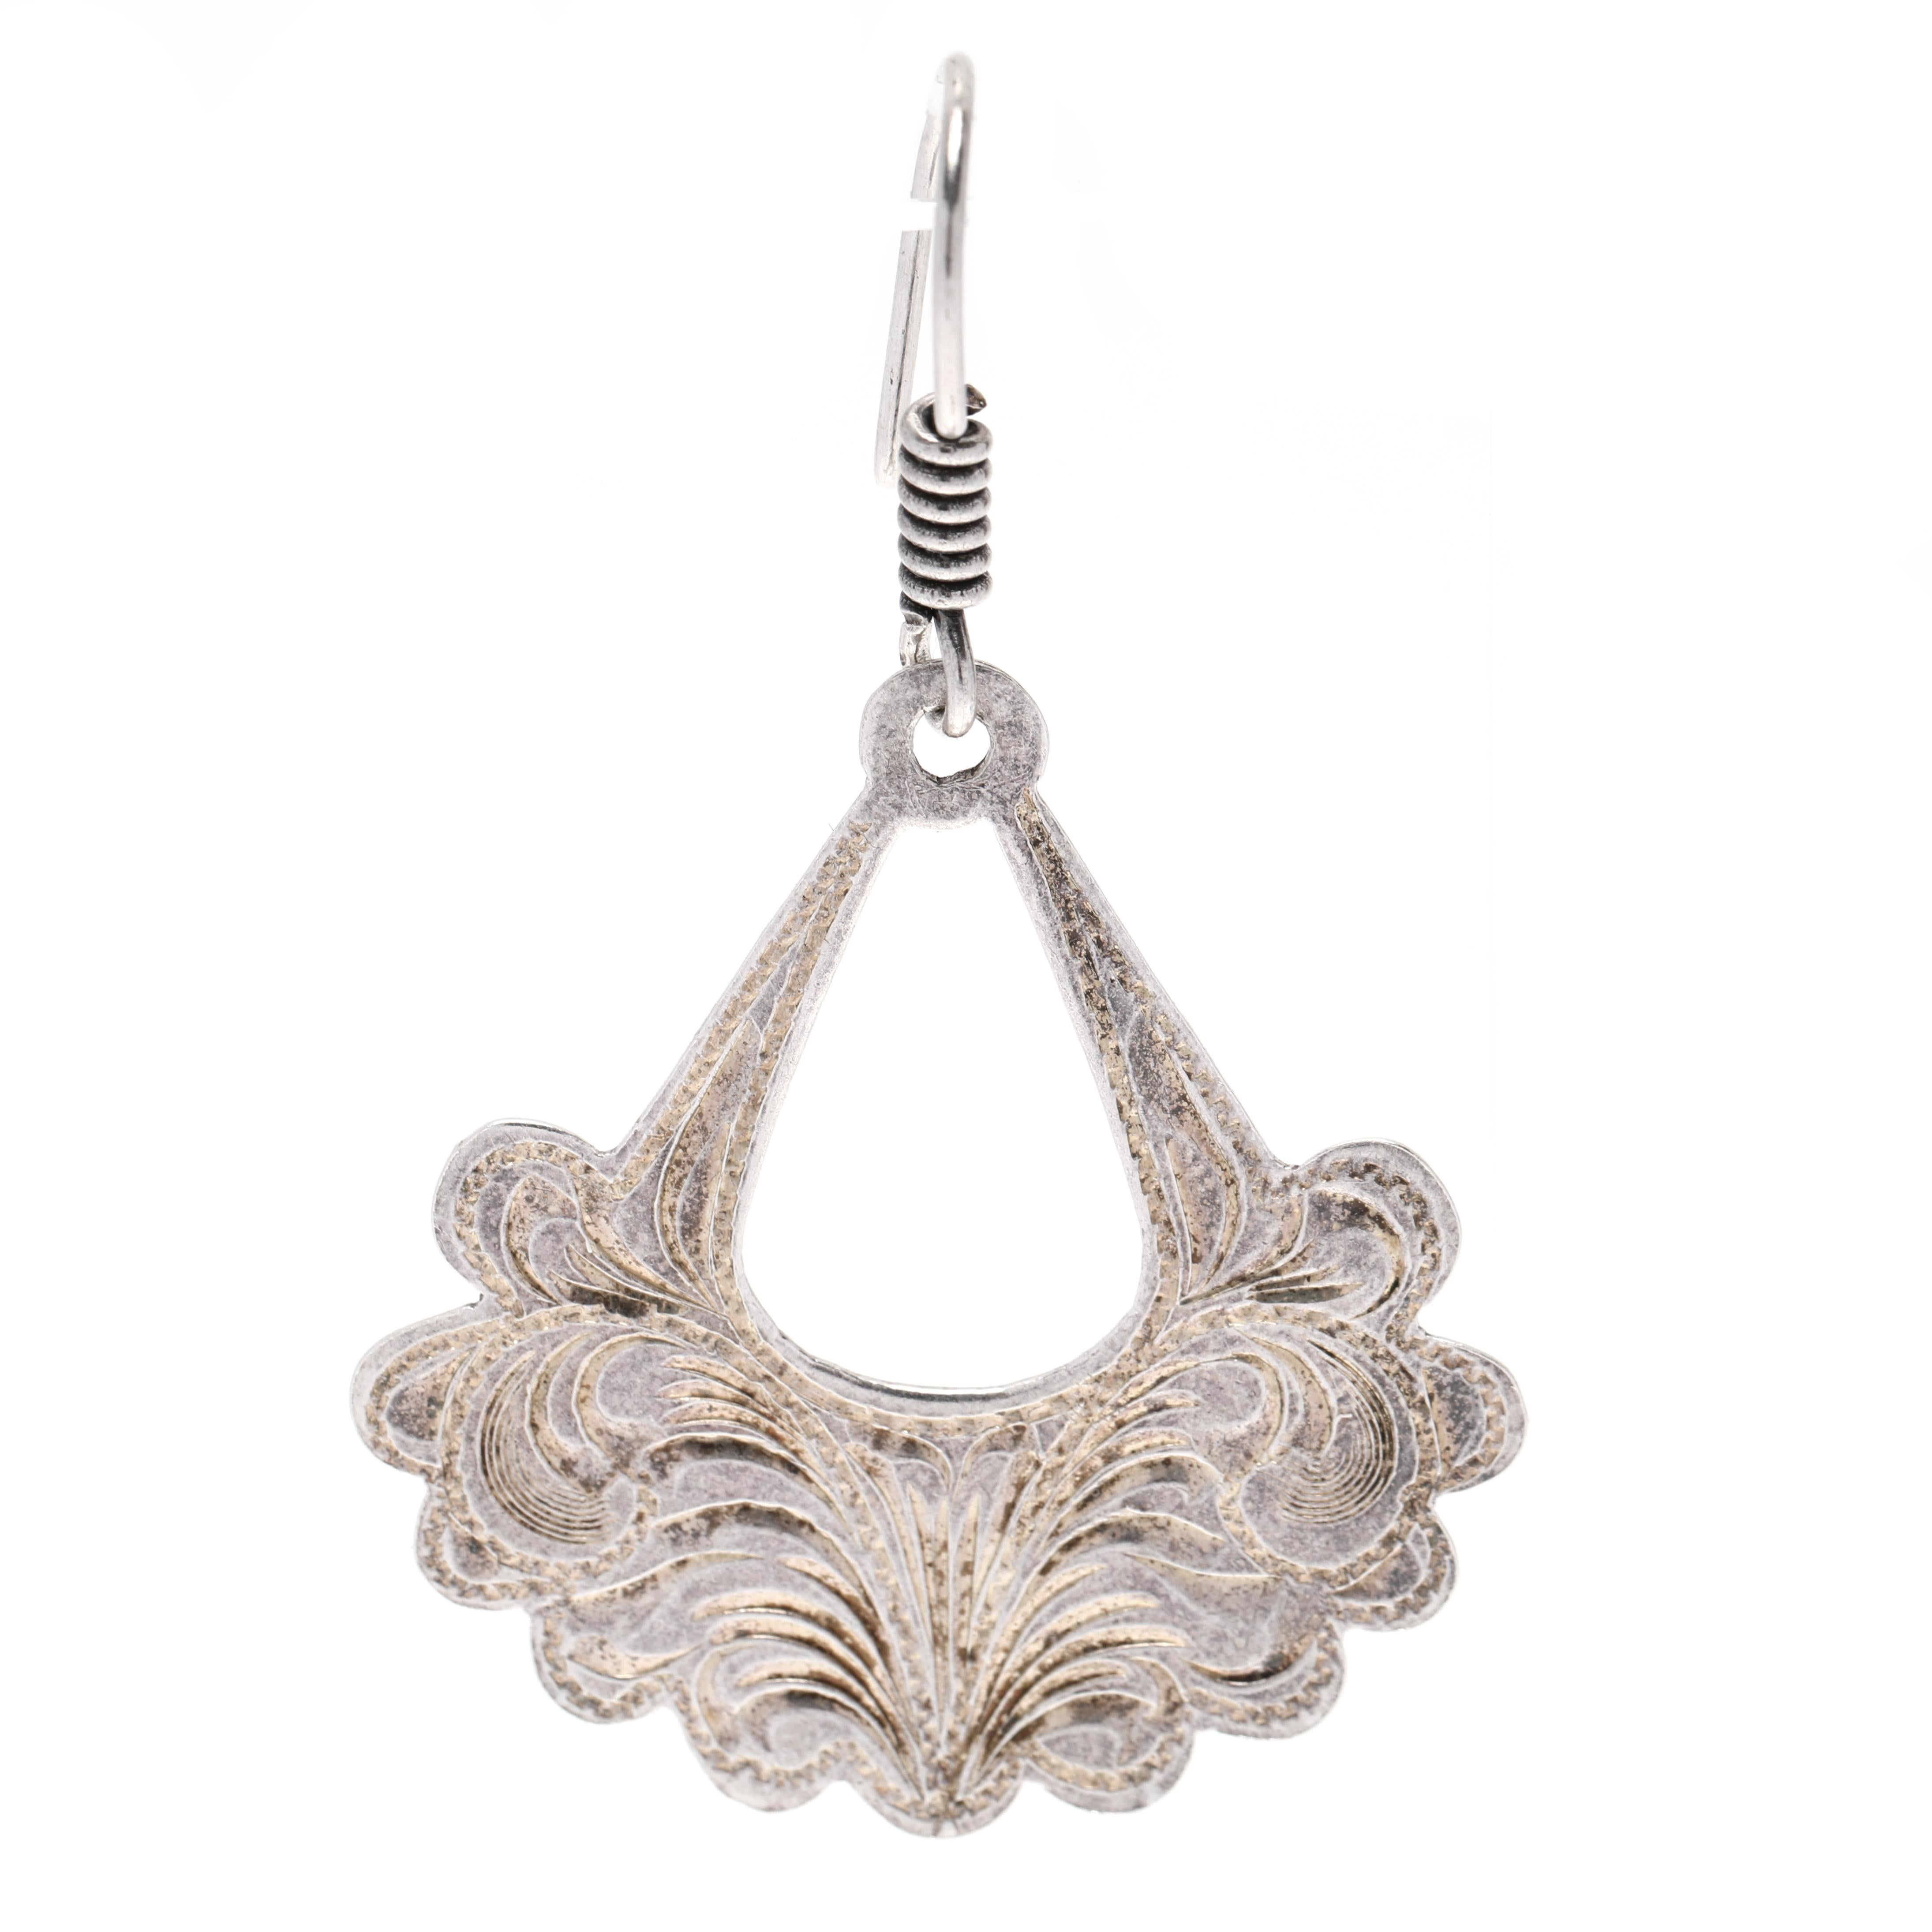 These one-of-a-kind Vintage Mexican Engraved Scroll Dangle Earrings are the perfect statement piece for any outfit. Crafted of sterling silver, these eye-catching earrings measure 2 1/8 inches in length and feature intricate, hand-engraved details.